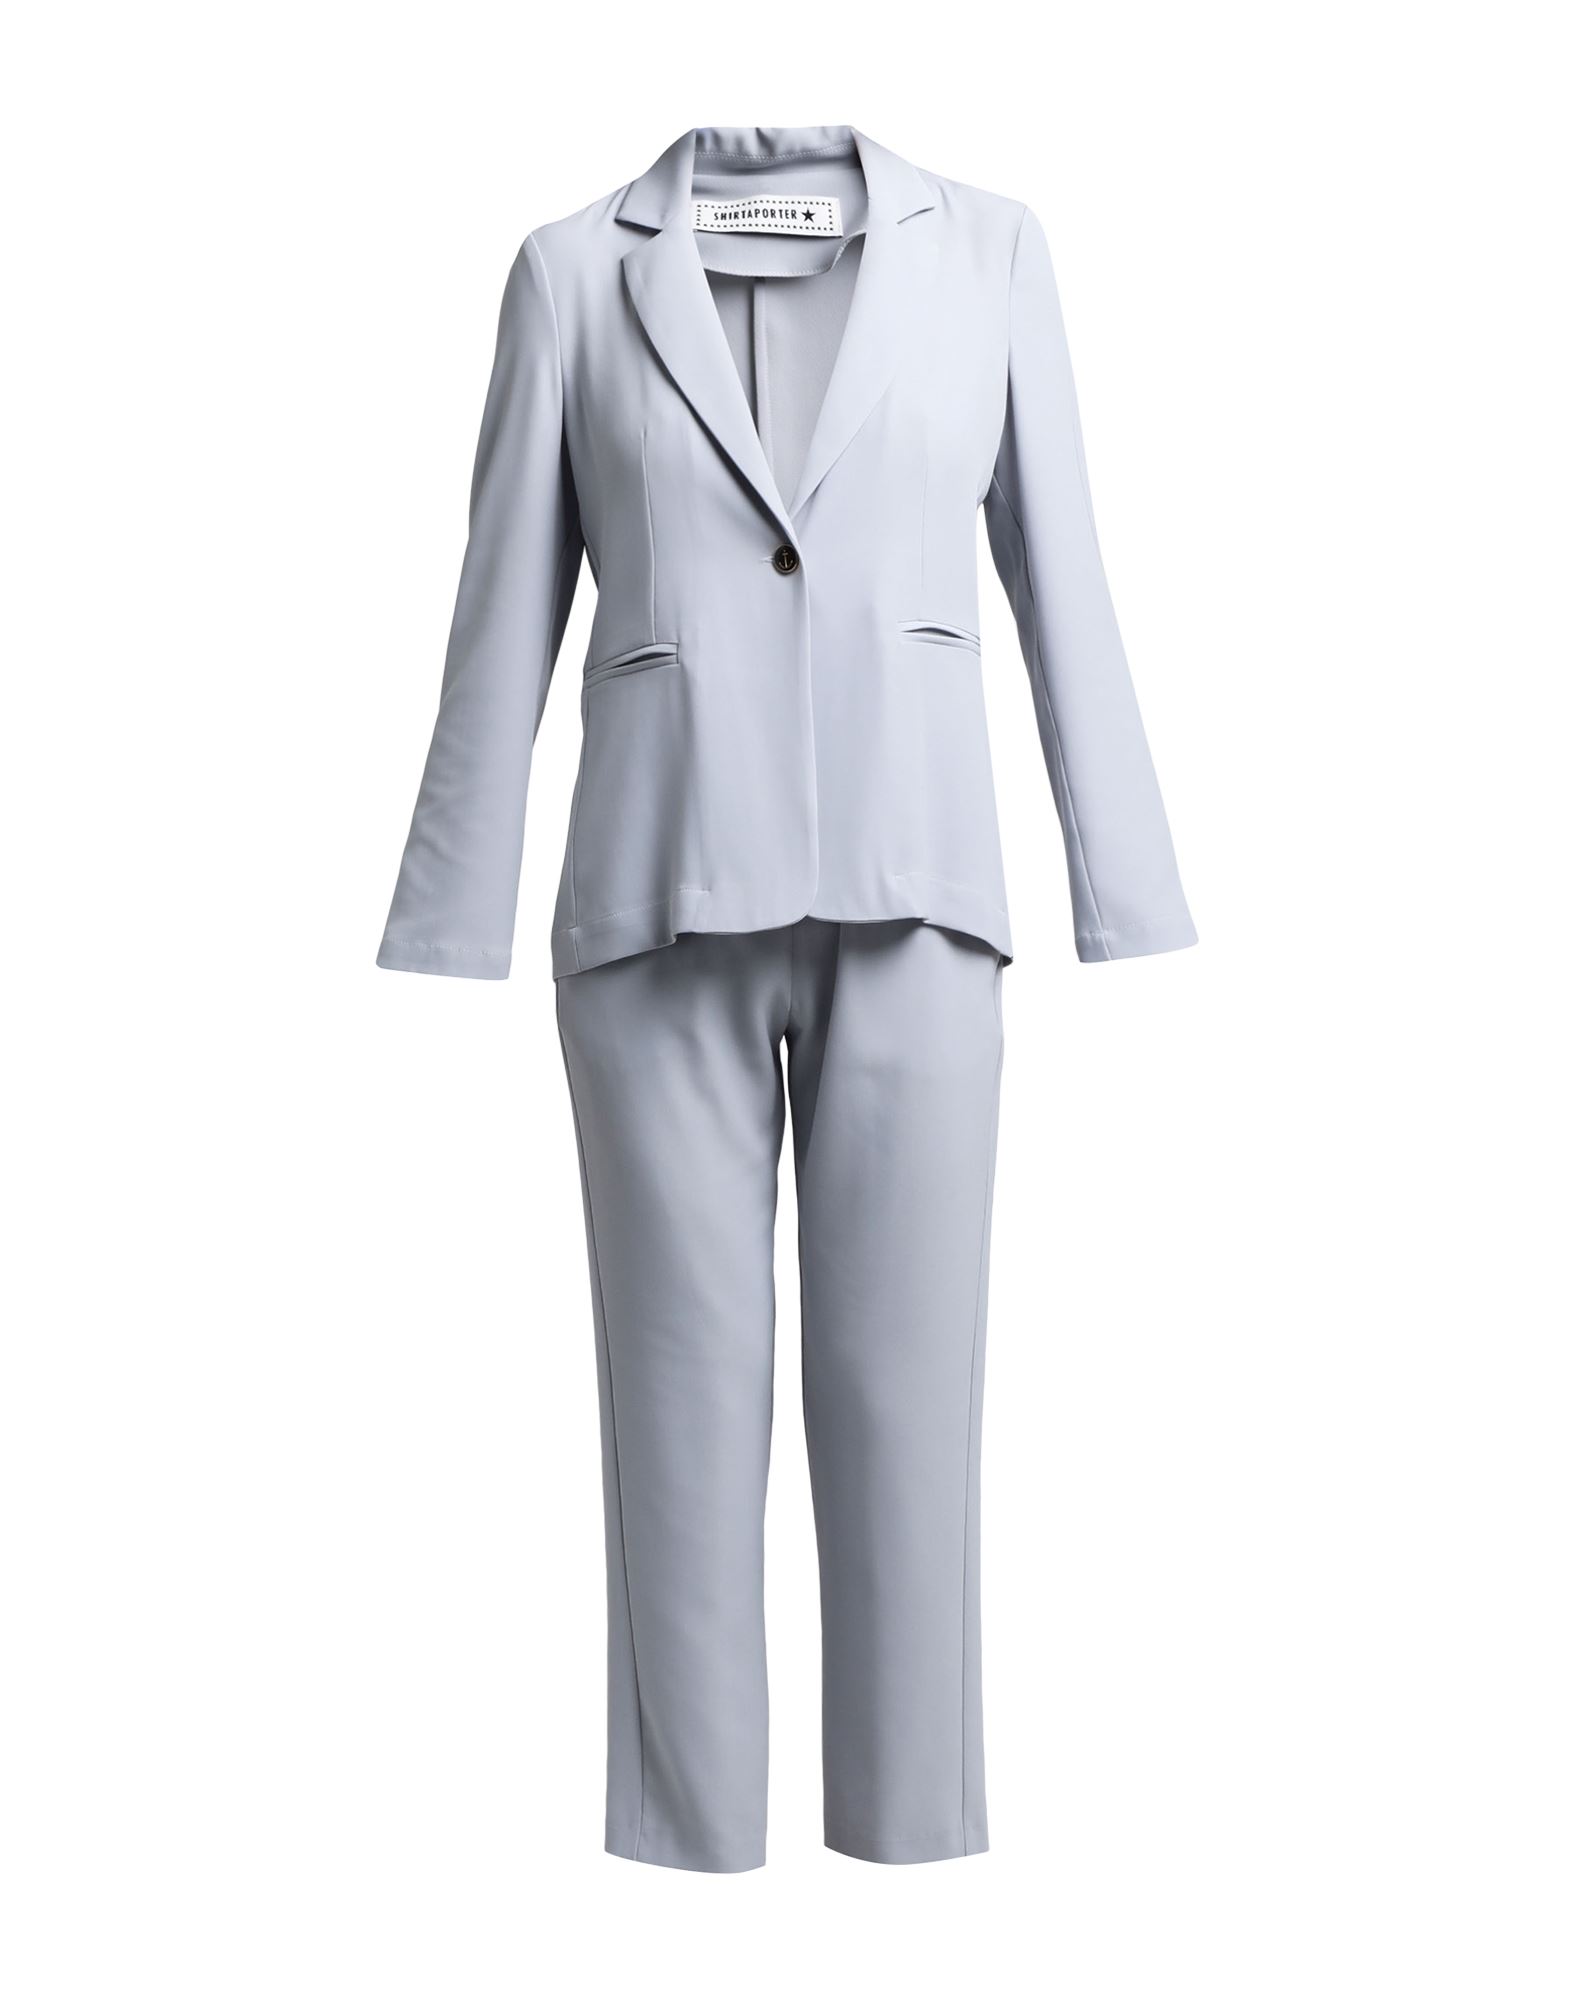 Shirtaporter Suits In Grey